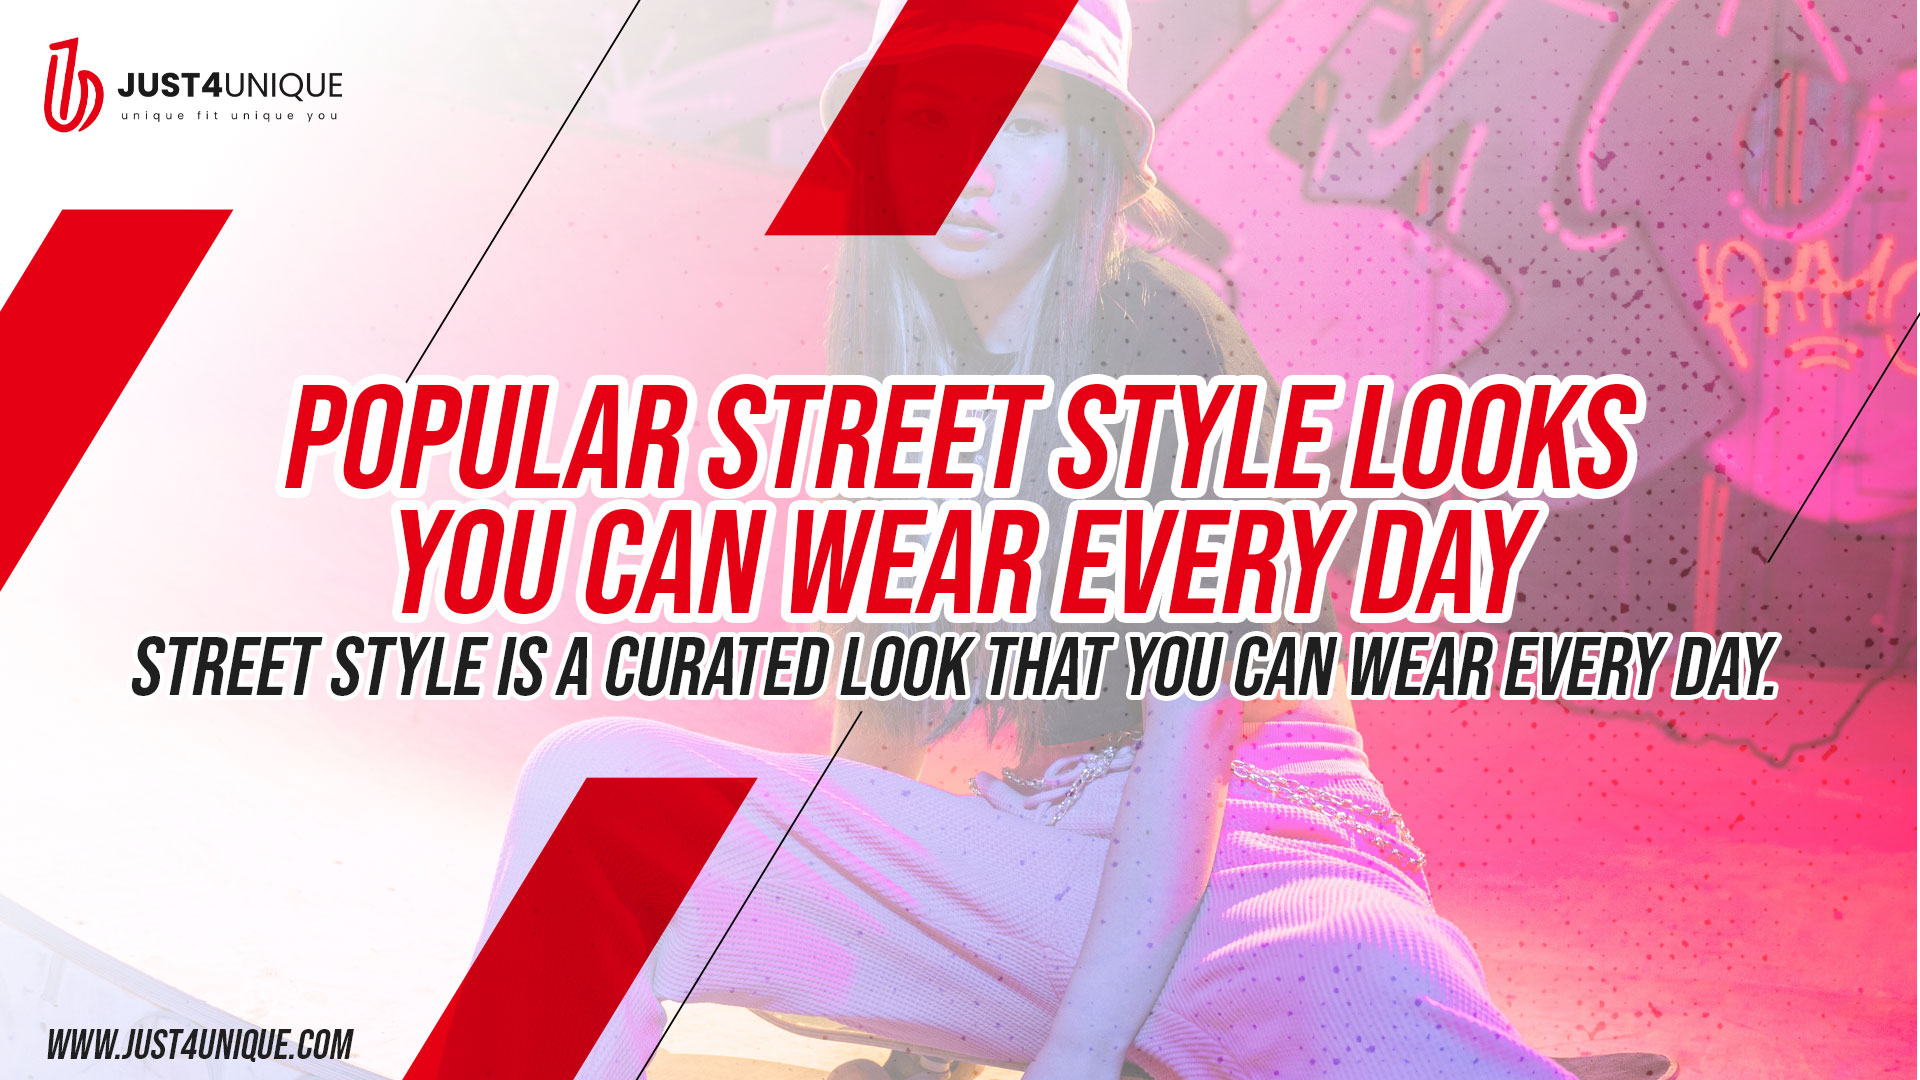 streetstyle edgy fashion online